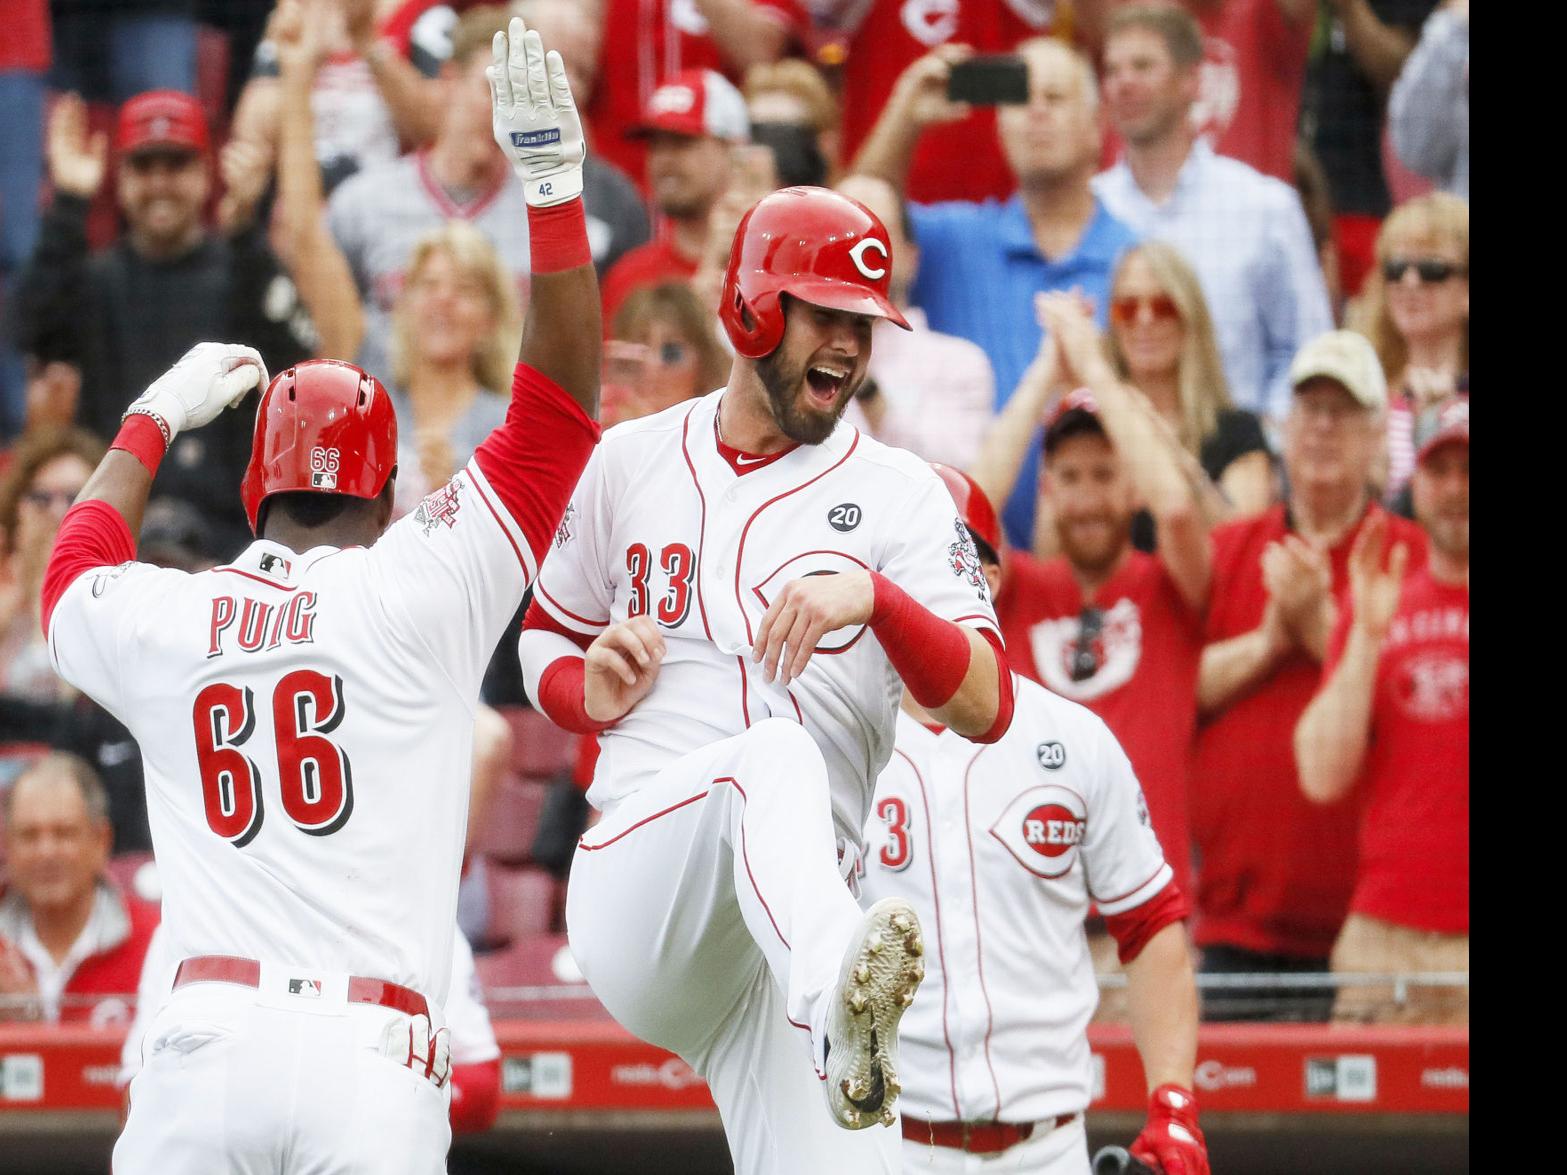 Puig's long homer helps Reds beat Braves 7-6, Sports